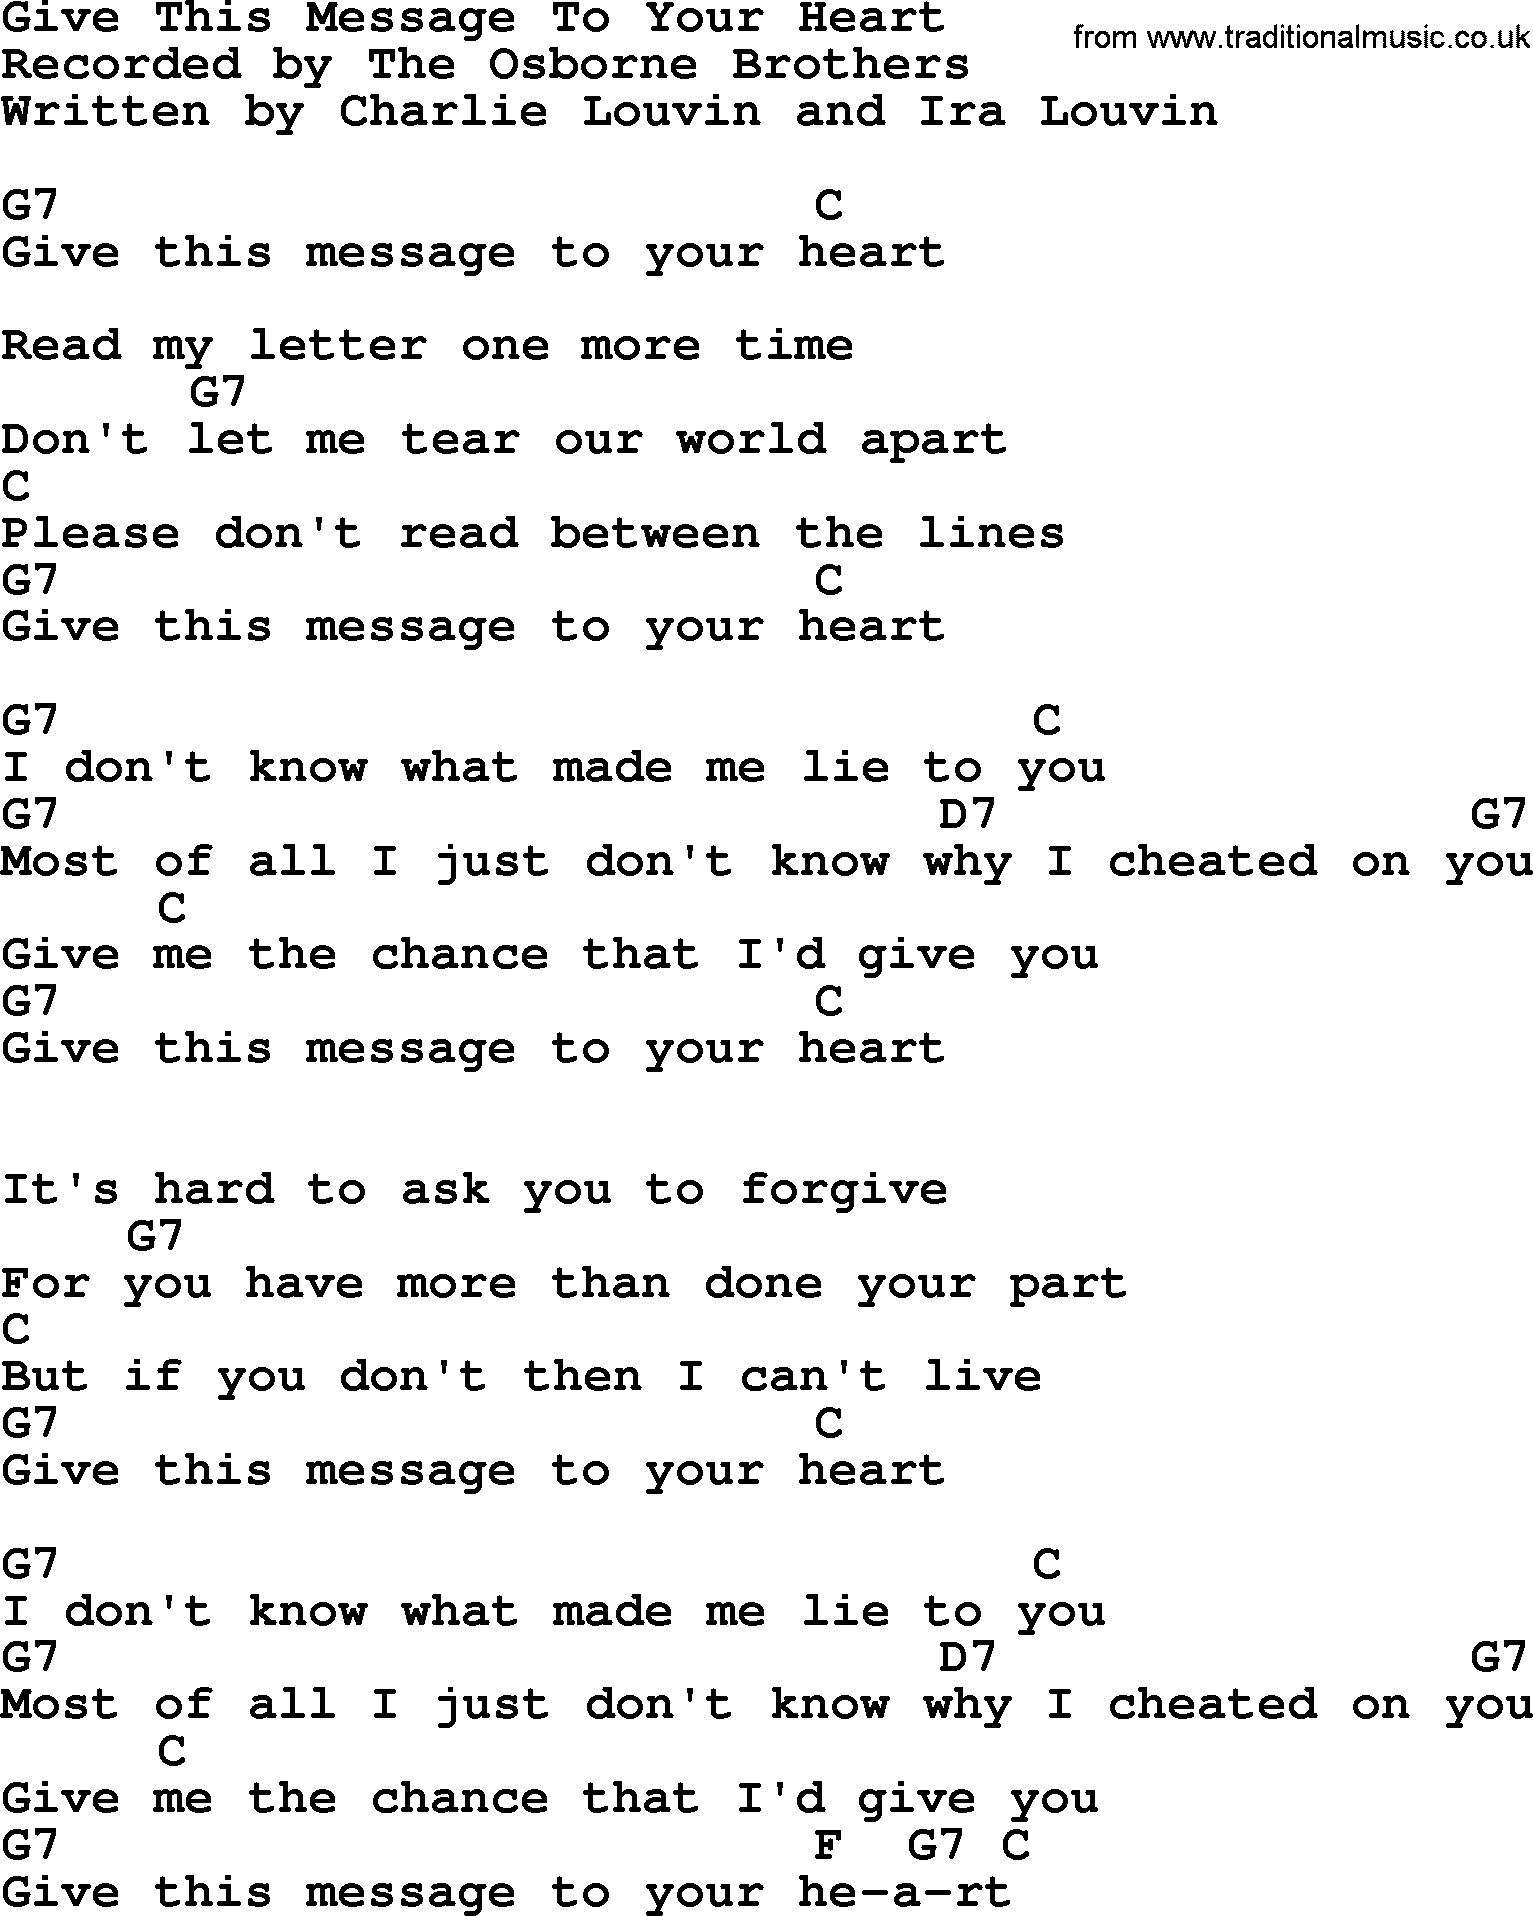 Bluegrass song: Give This Message To Your Heart, lyrics and chords